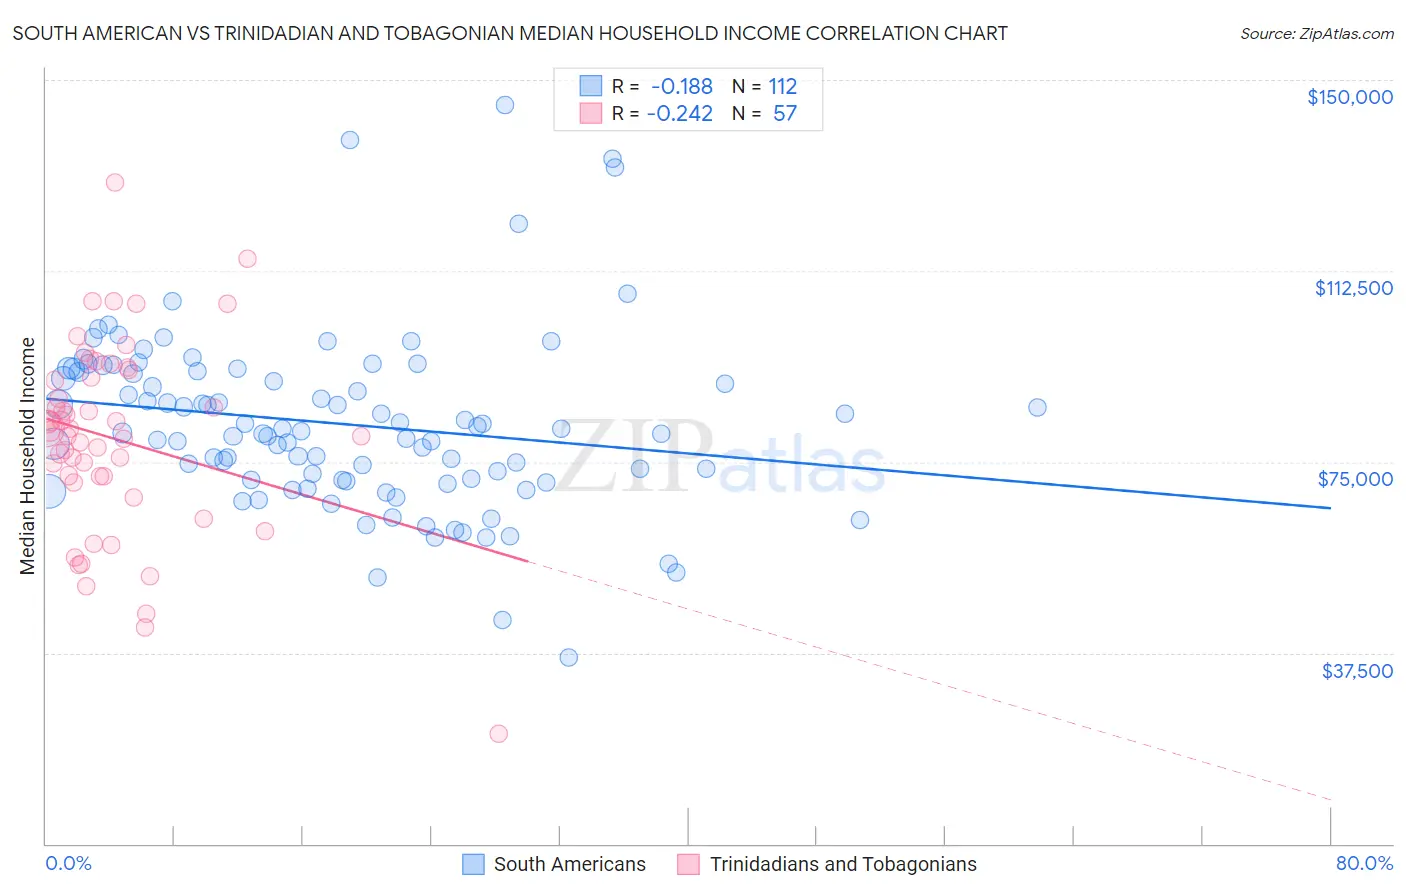 South American vs Trinidadian and Tobagonian Median Household Income